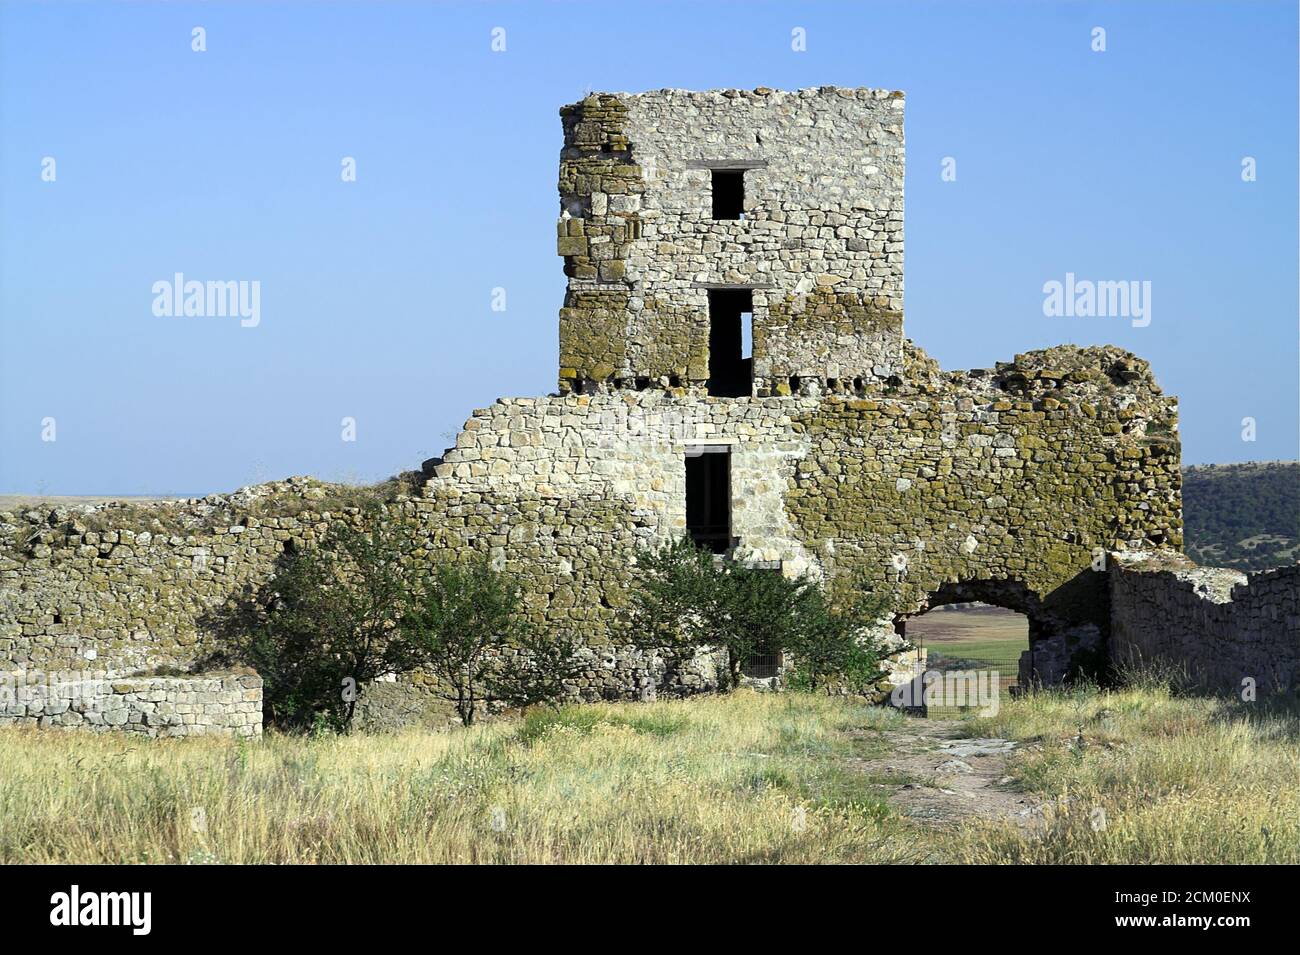 Roumanie, Château d'Enisala (Heracleea) - ruines d'un château médiéval. Rumänien, Château d'Enisala (Heracleea) - Ruinen einer mittelalterlichen Burg. 中世紀城堡的廢墟 Banque D'Images